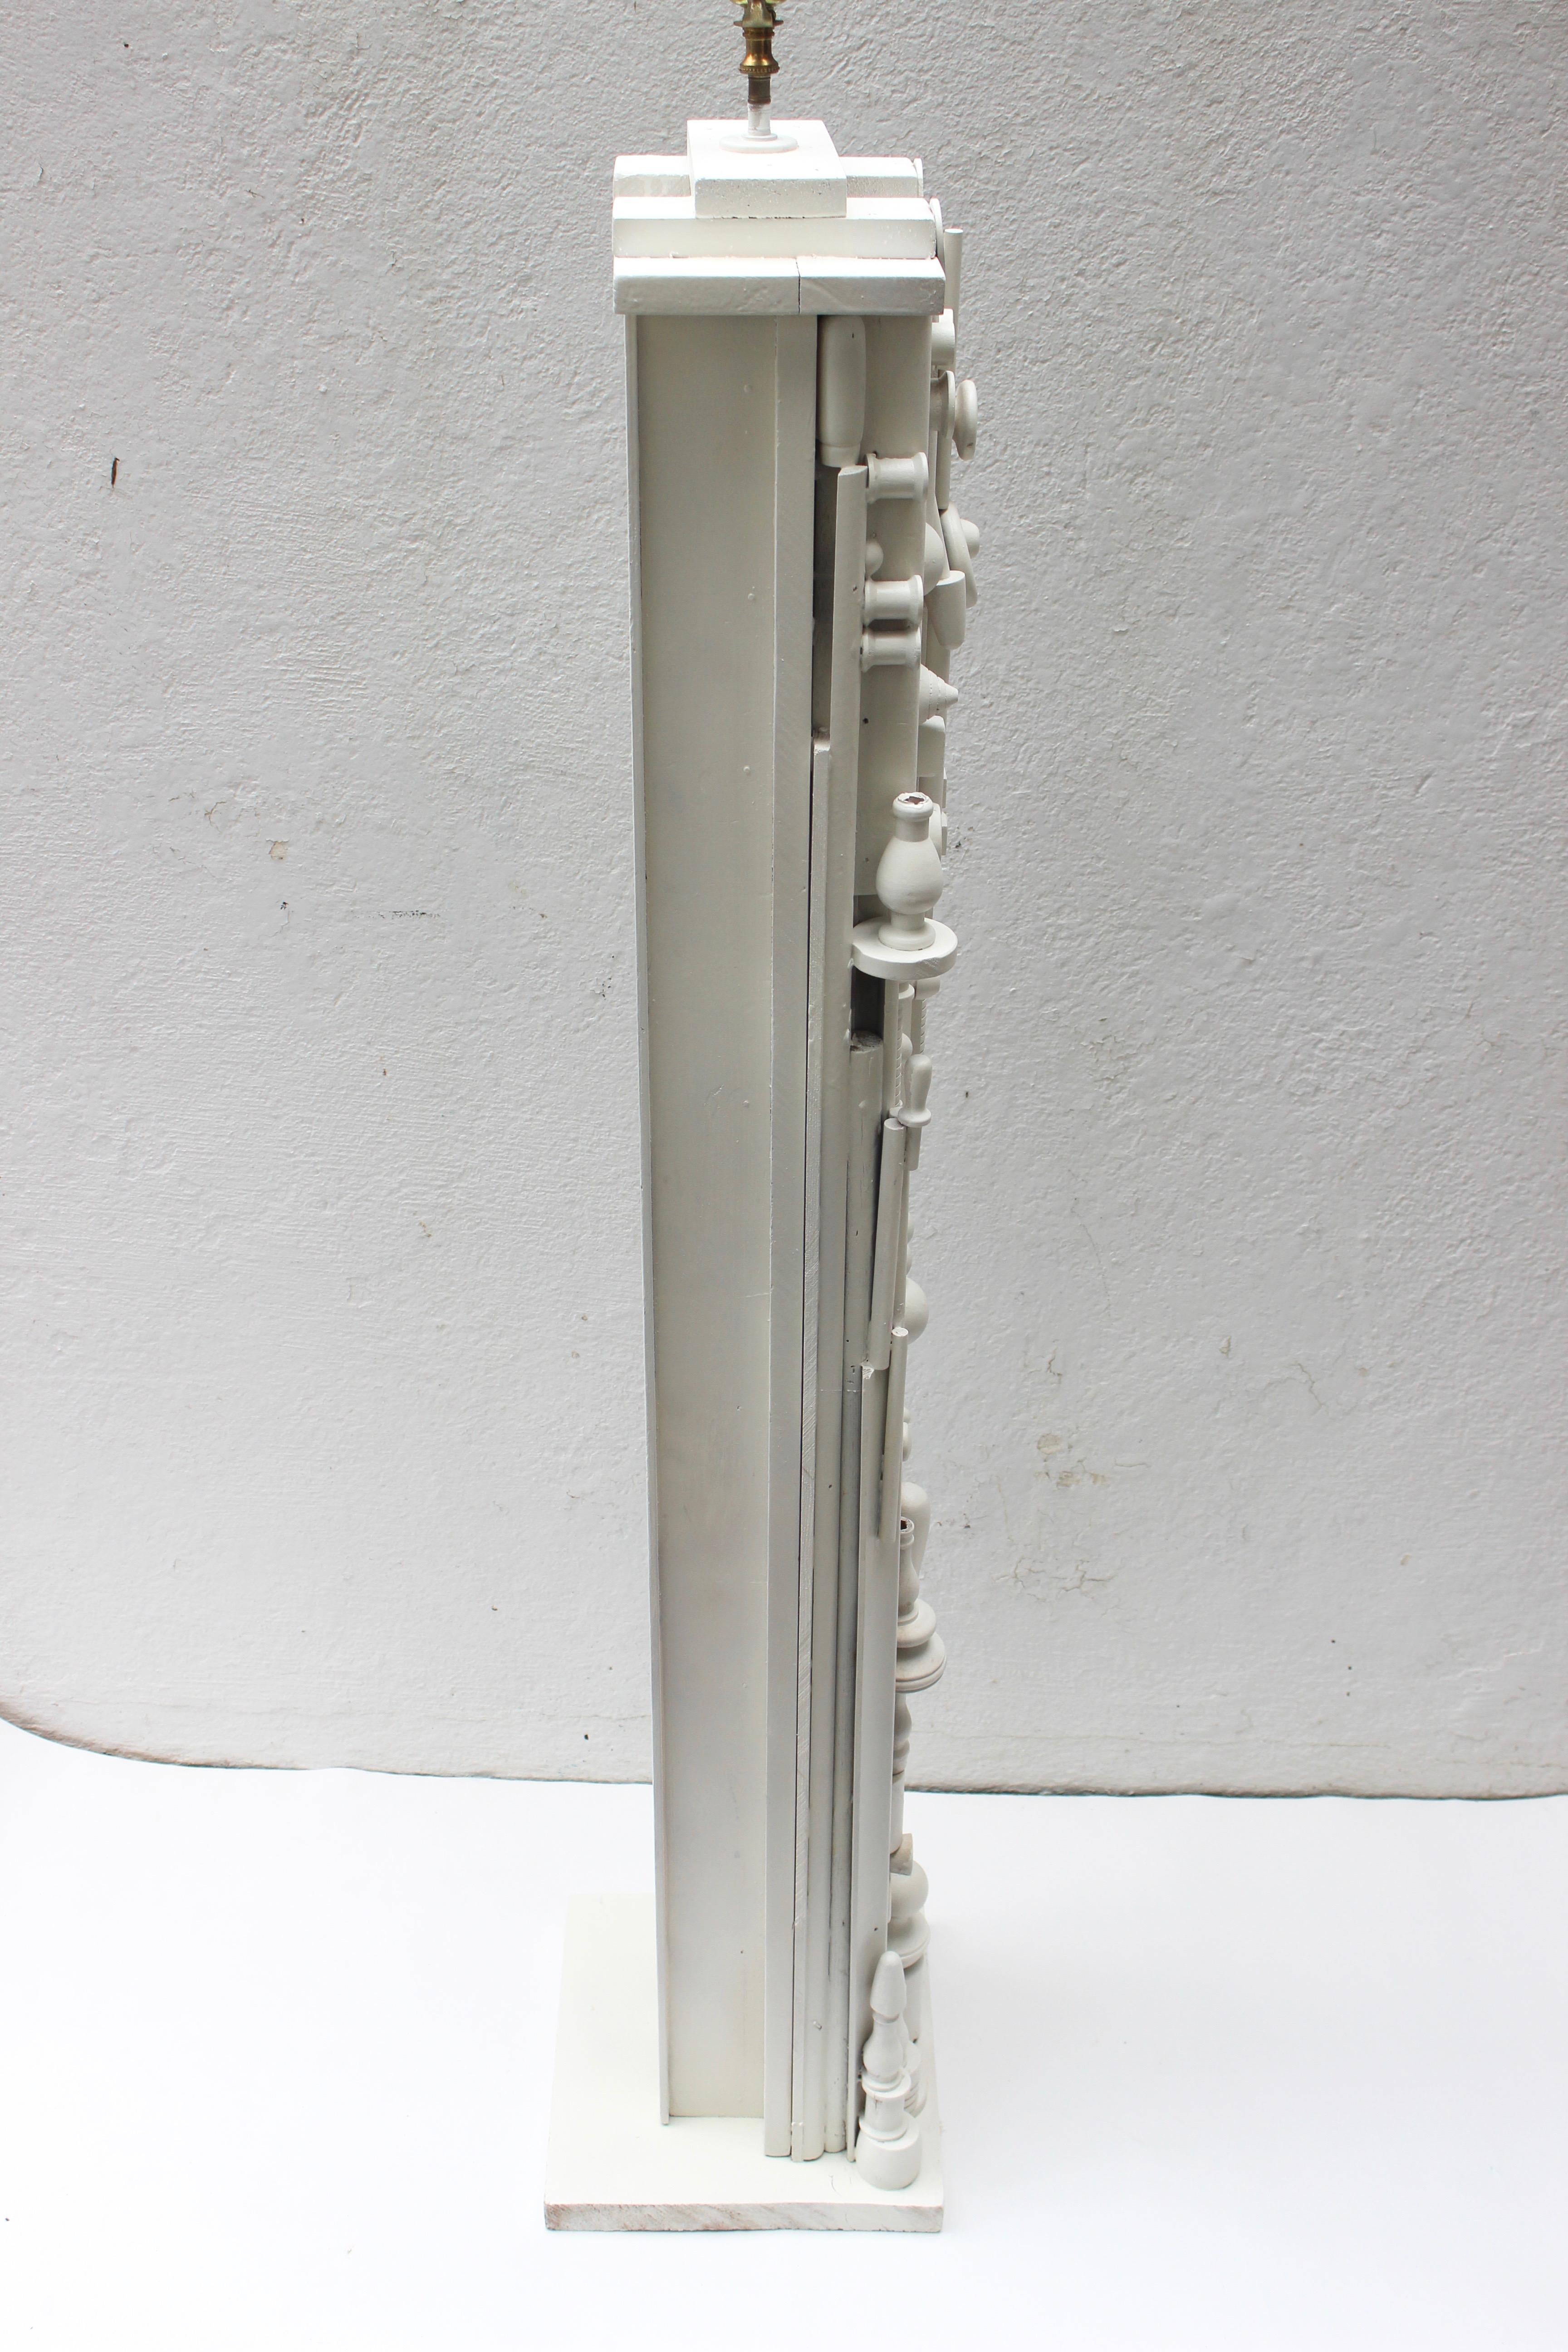 Louise Nevelson Style Floor Lamp In Good Condition For Sale In East Hampton, NY